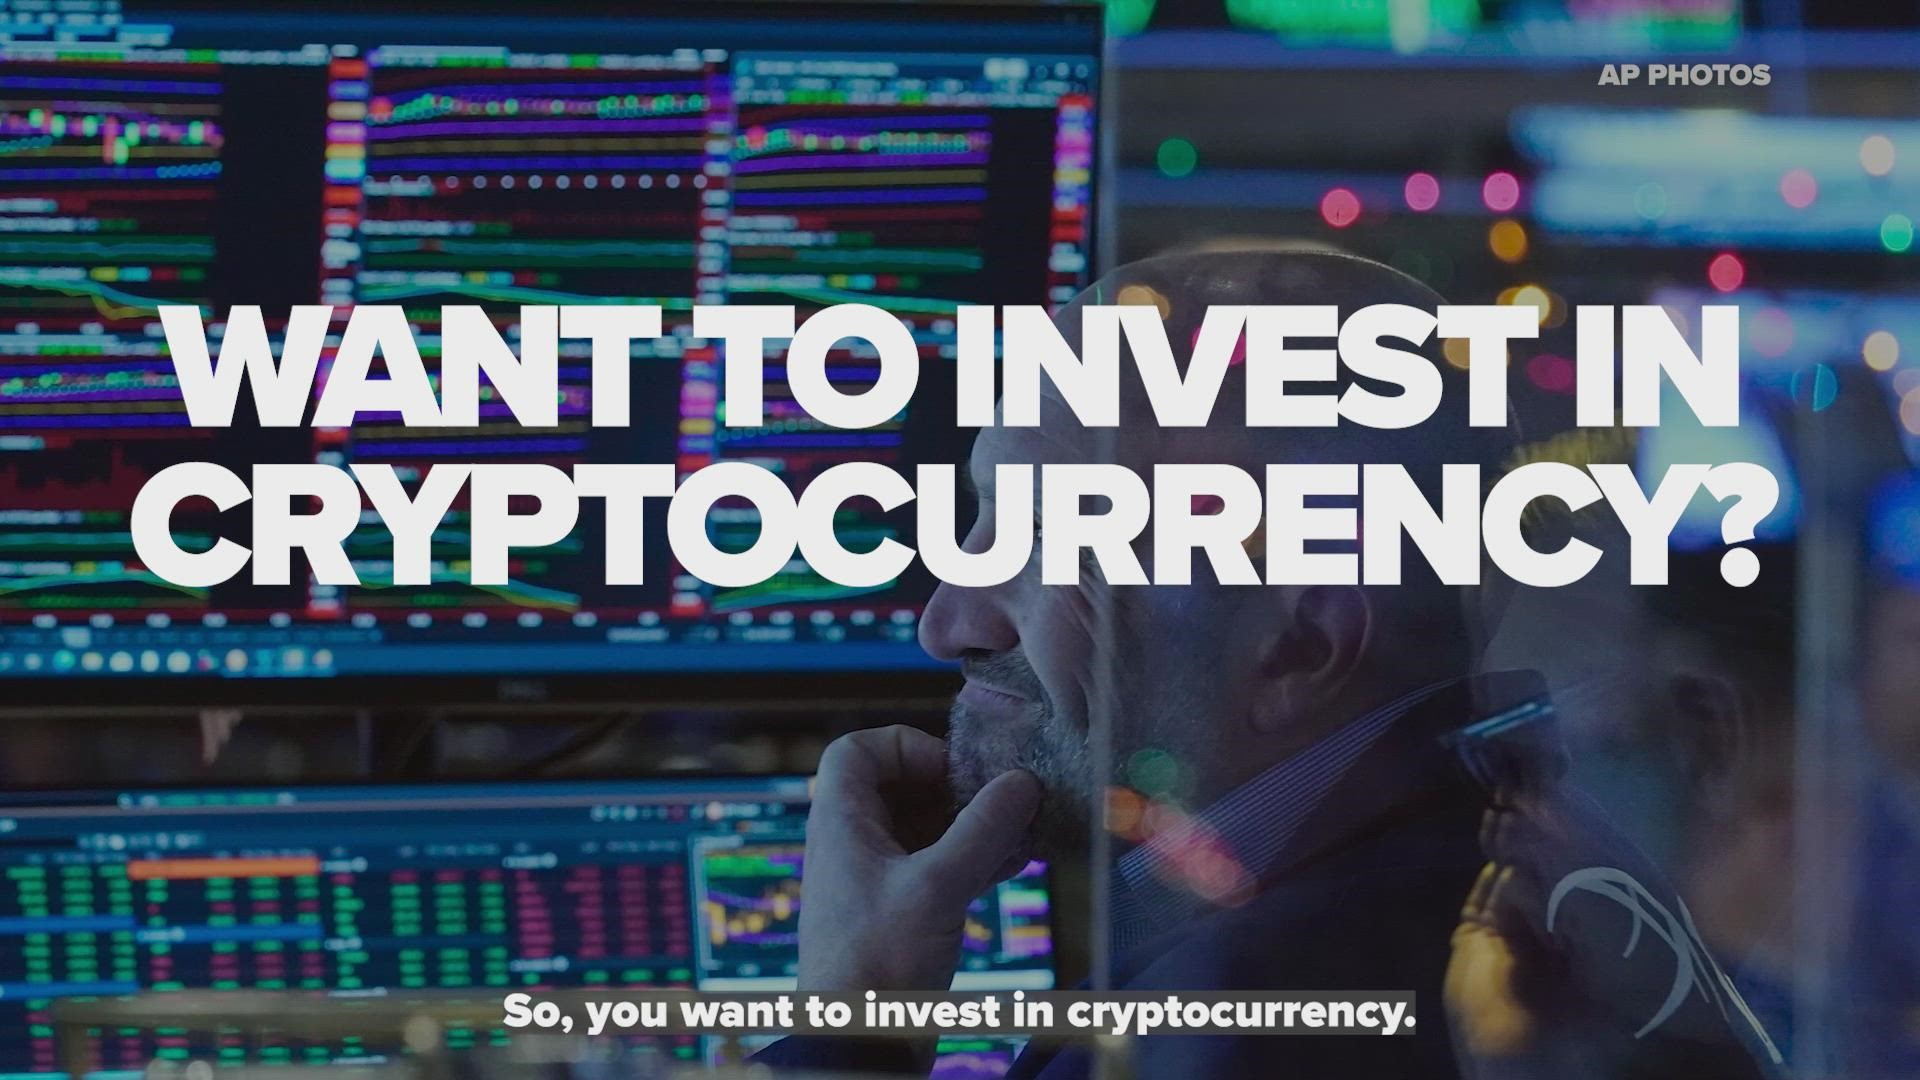 You’ve seen it advertised on tv, heard about it on your favorite podcasts, and now you want to know how you can buy and invest in cryptocurrency.